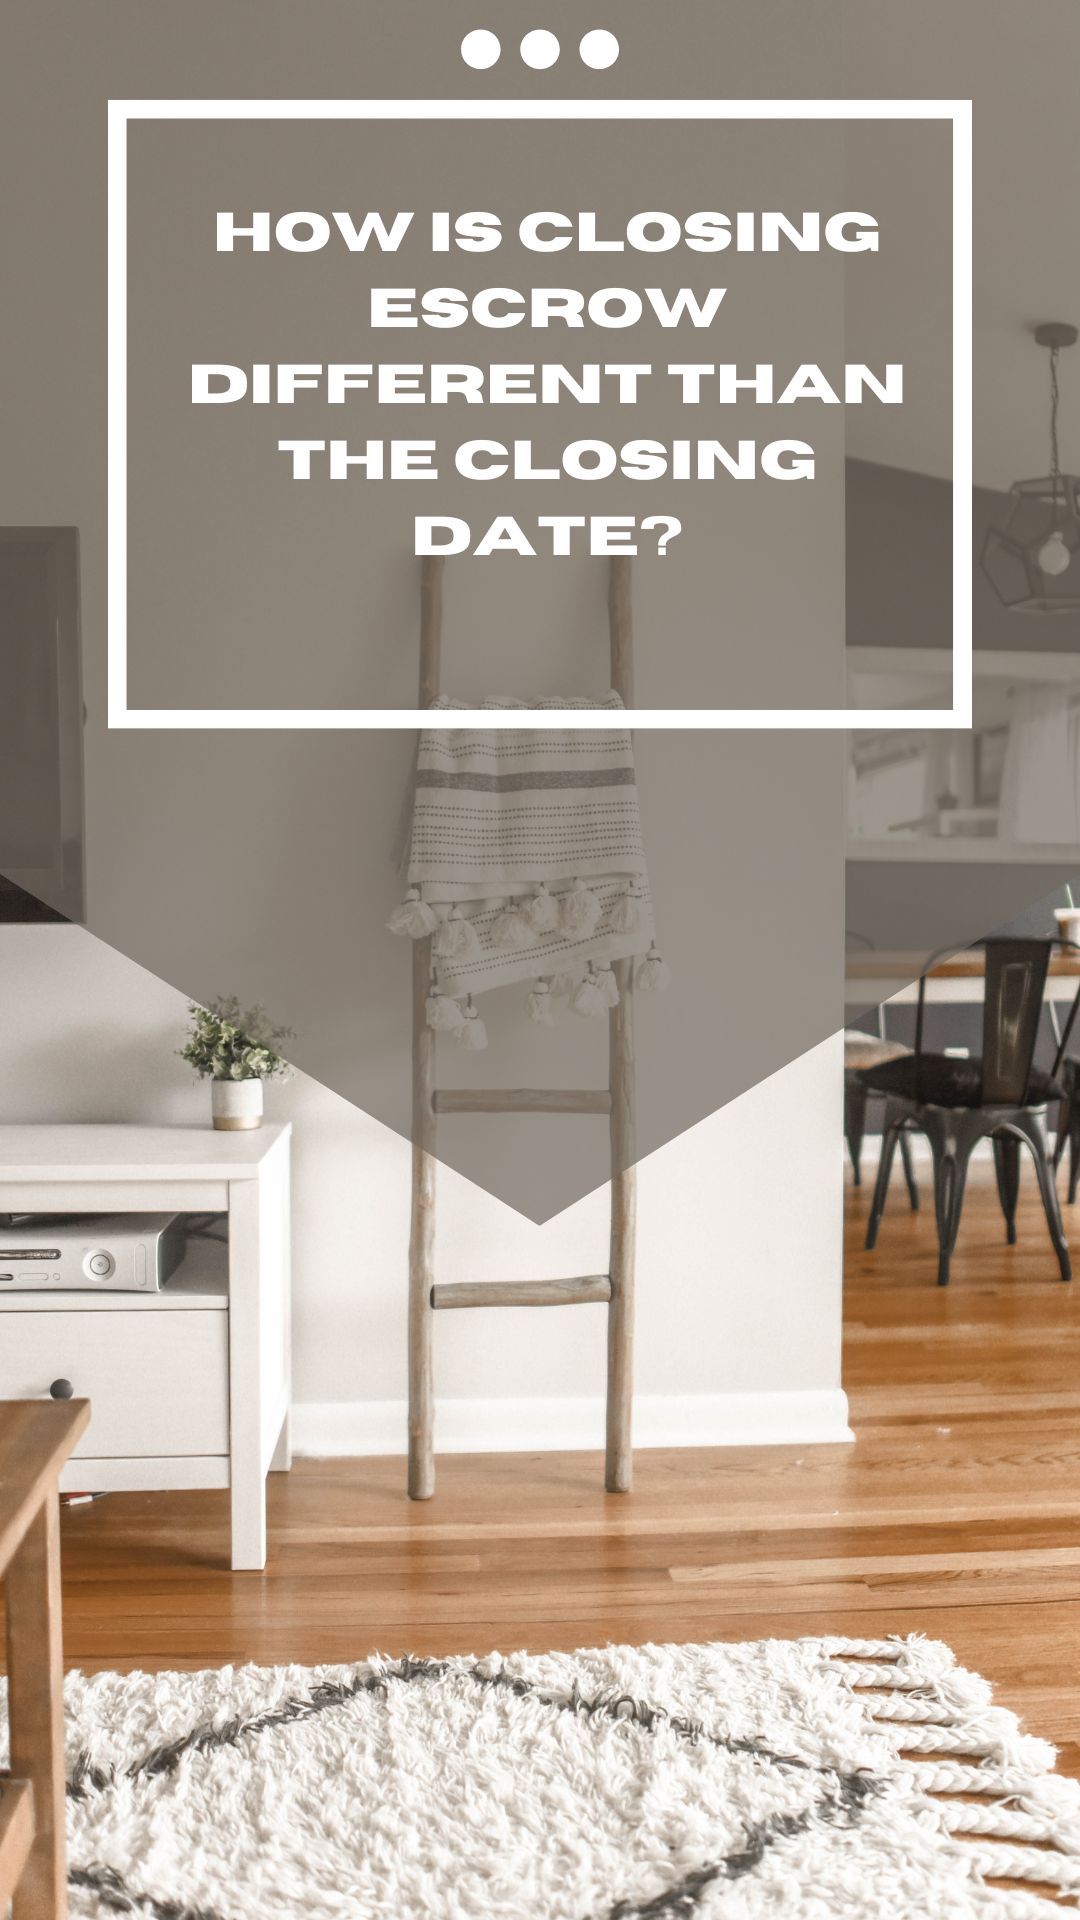 How is Closing Escrow Different than the Closing Date?